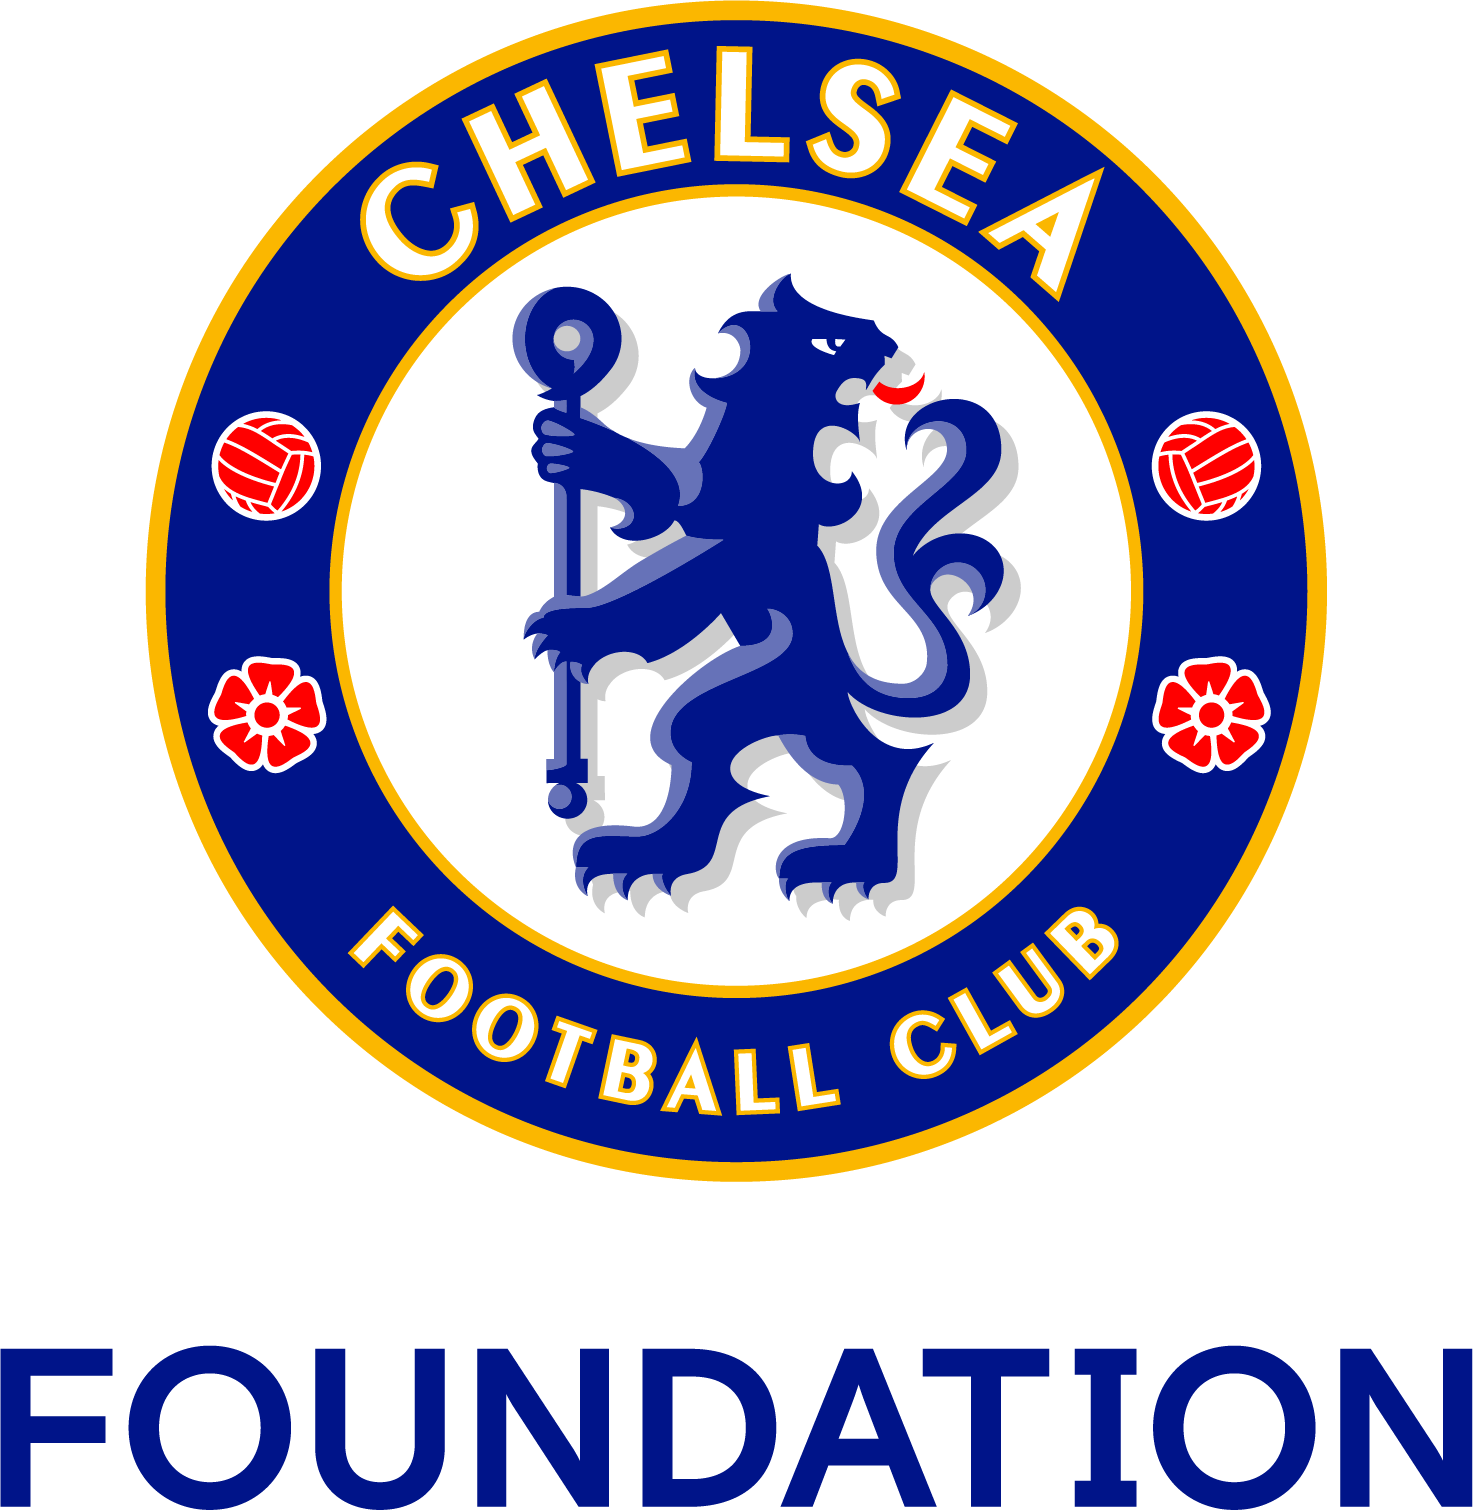 Chelsea Foundation - Bannisters Outdoor sports centre